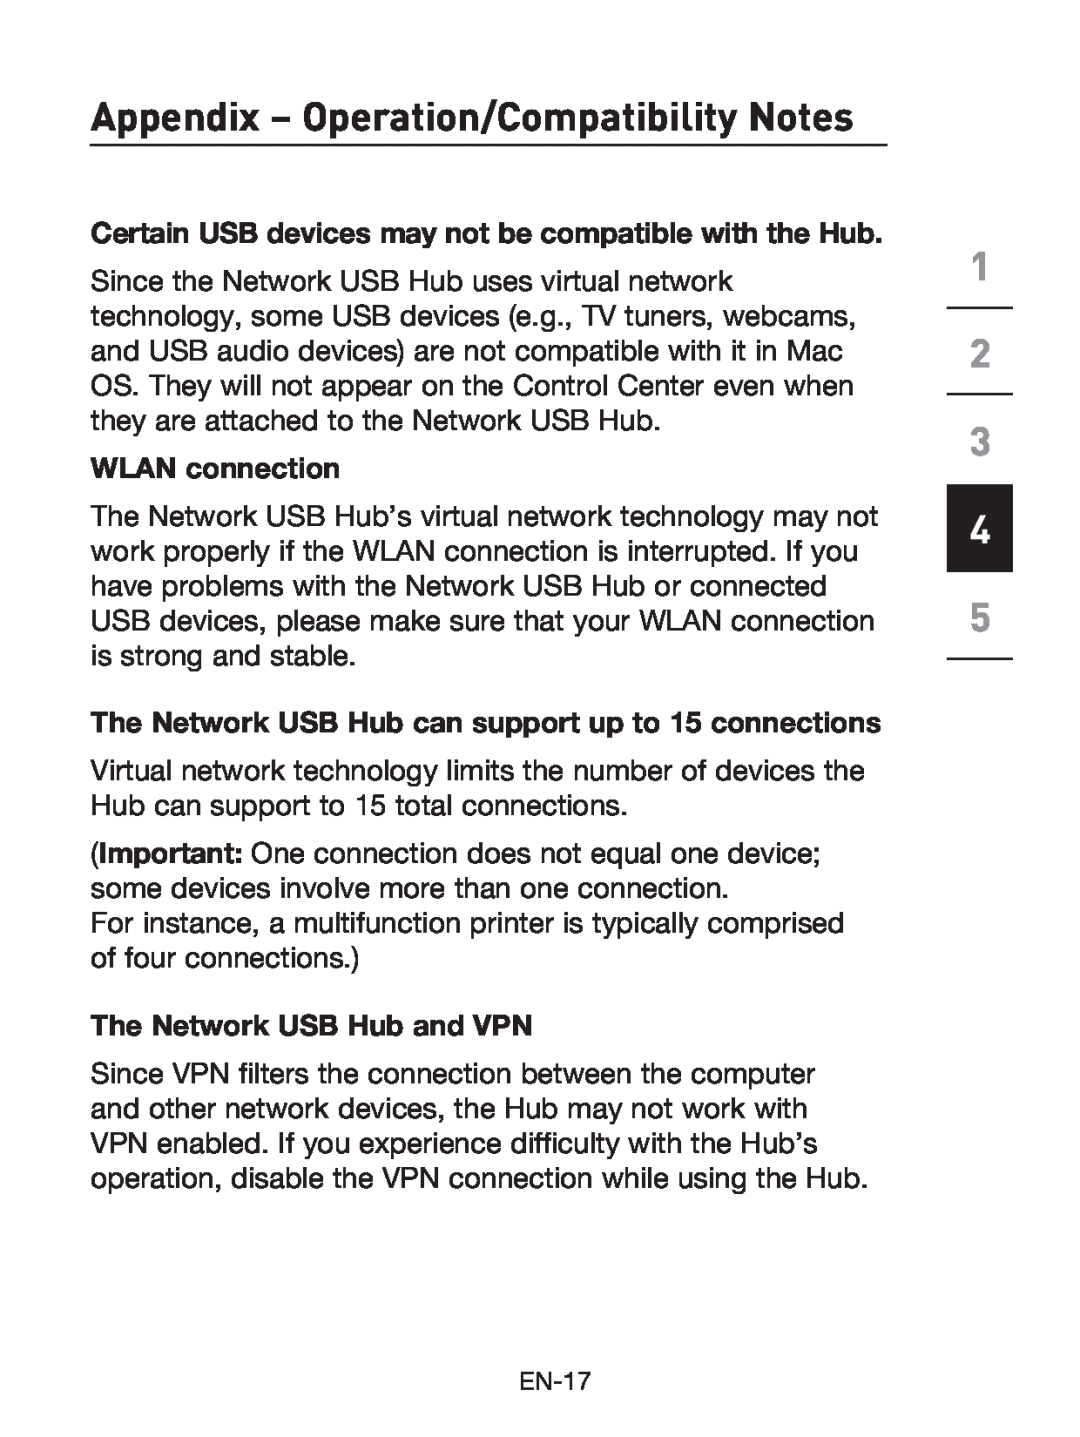 Belkin F5L009 user manual Appendix - Operation/Compatibility Notes, Certain USB devices may not be compatible with the Hub 